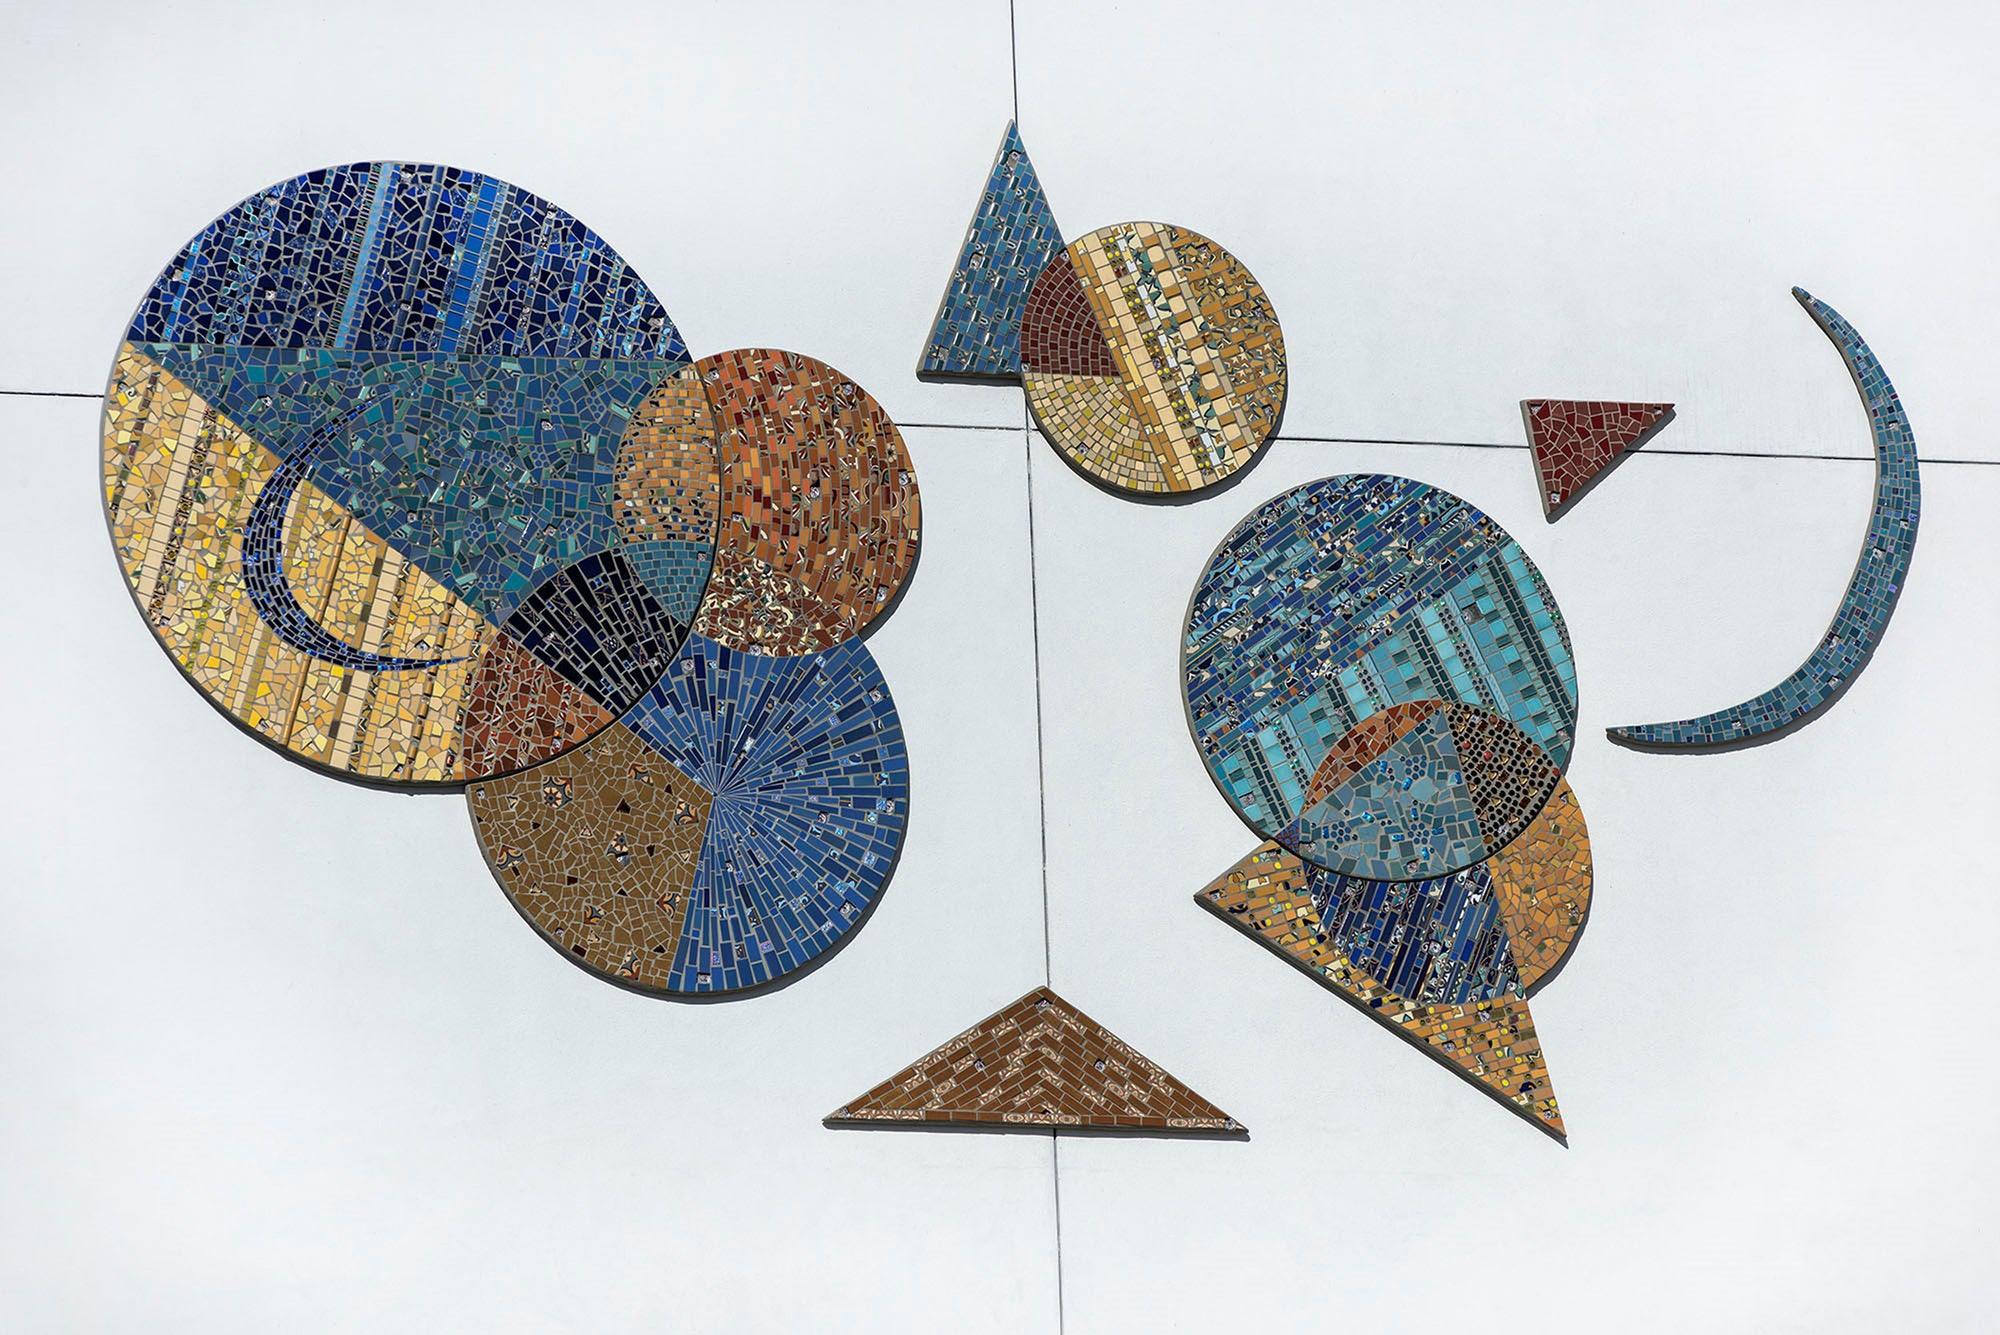 A large mosaic made up of geometric shapes intersecting. Circles, triangles, and half moons in blues and yellows.